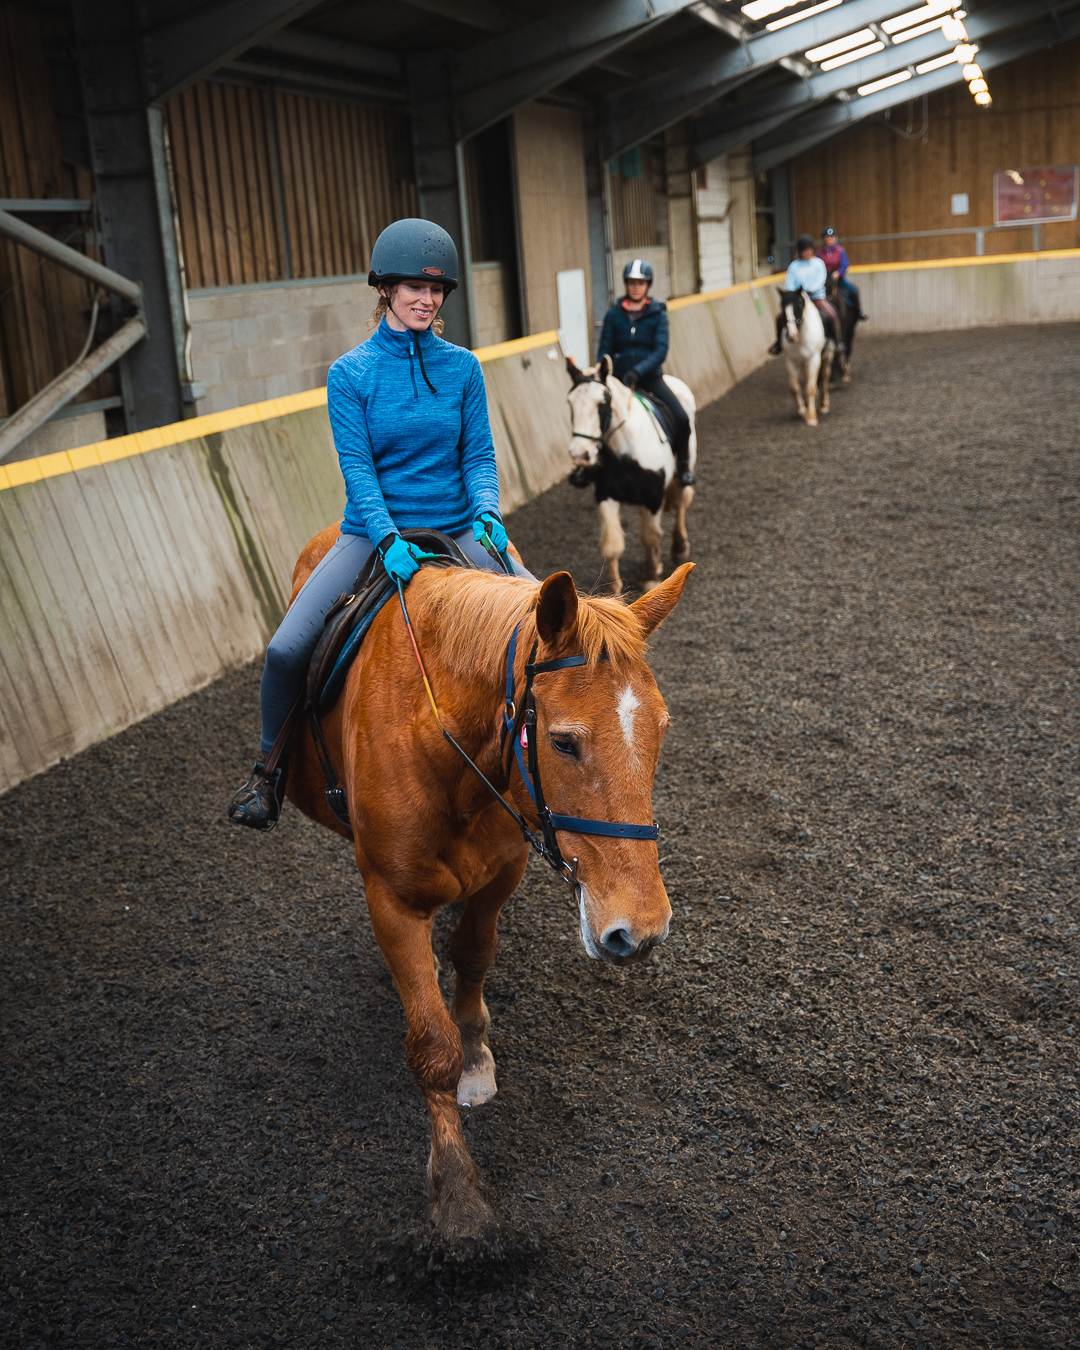 A guest in a blue fleece and gloves wearing a riding hat is riding a ginger coloured horse in the indoor arena at Calvert Exmoor's Equestrian Centre. There are other guests on horses in the background.